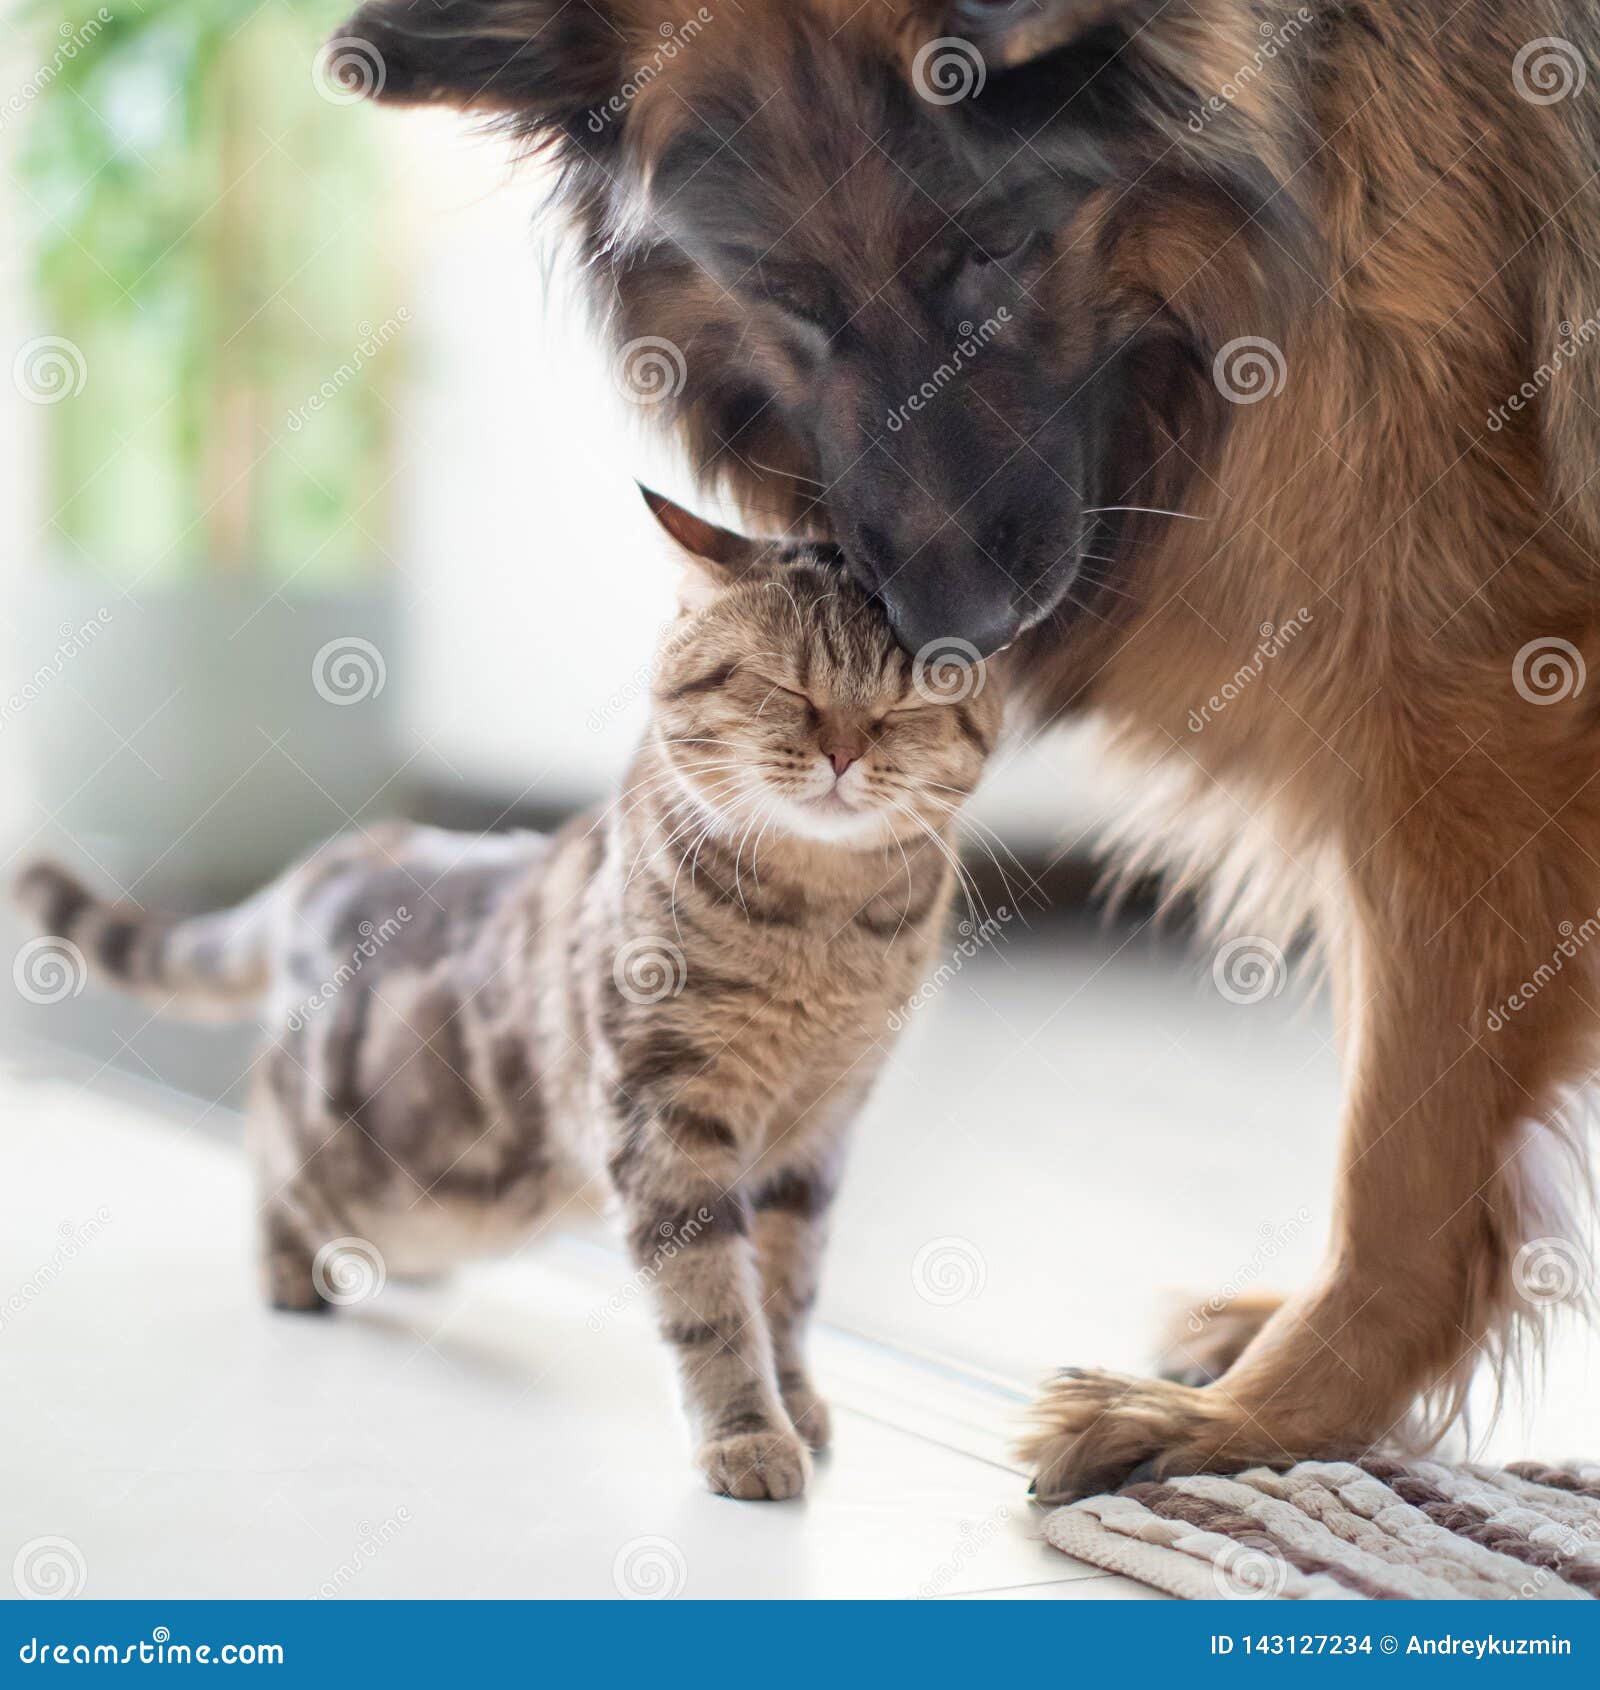 cat and dog friends together indoors. friendship between pets.